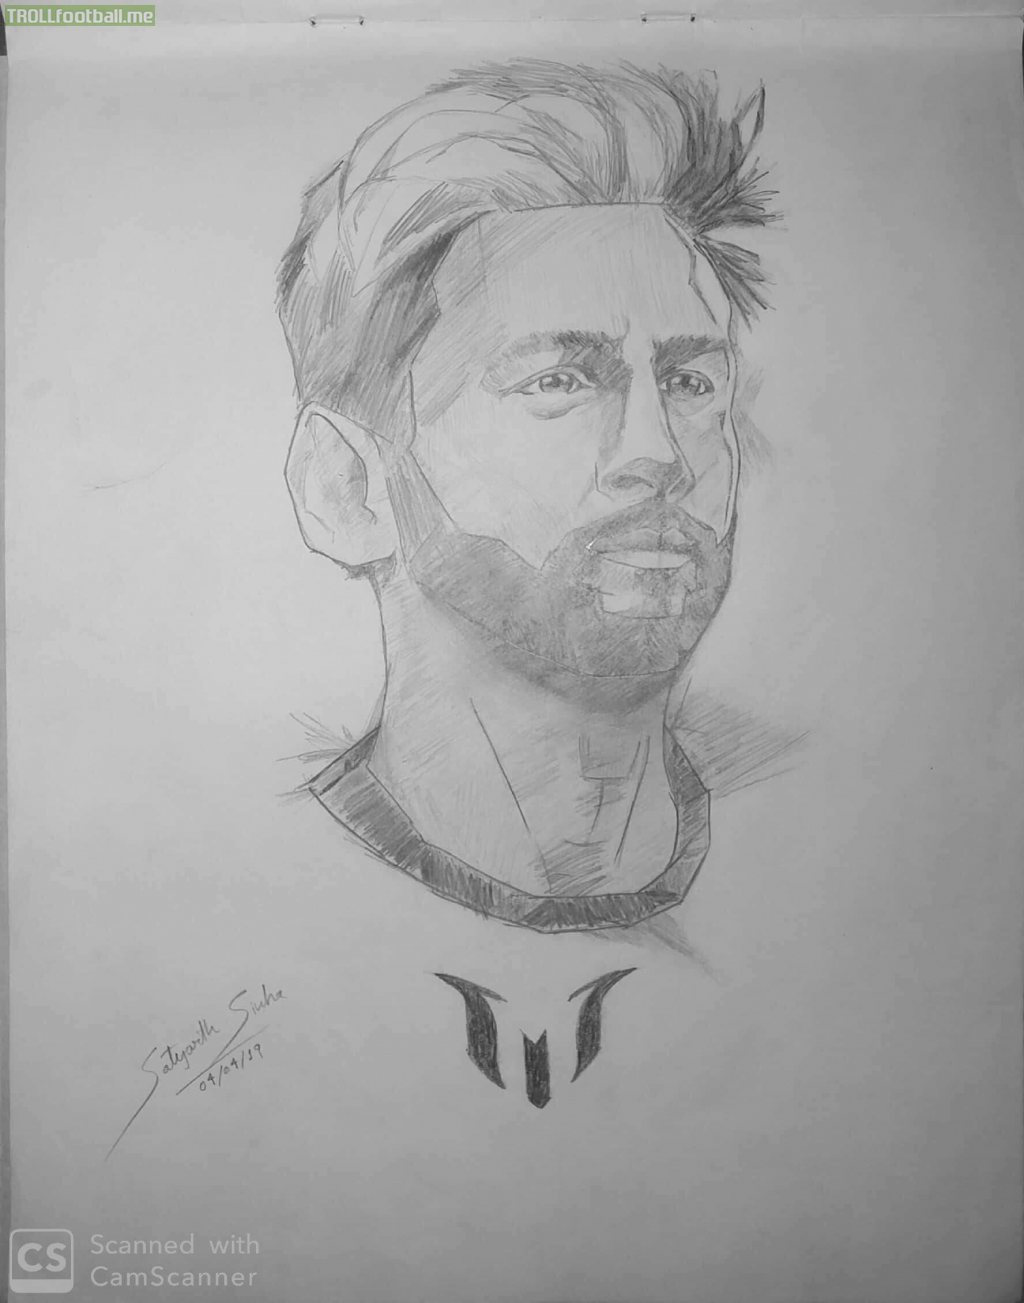 Messi I'd drawn exactly an year back